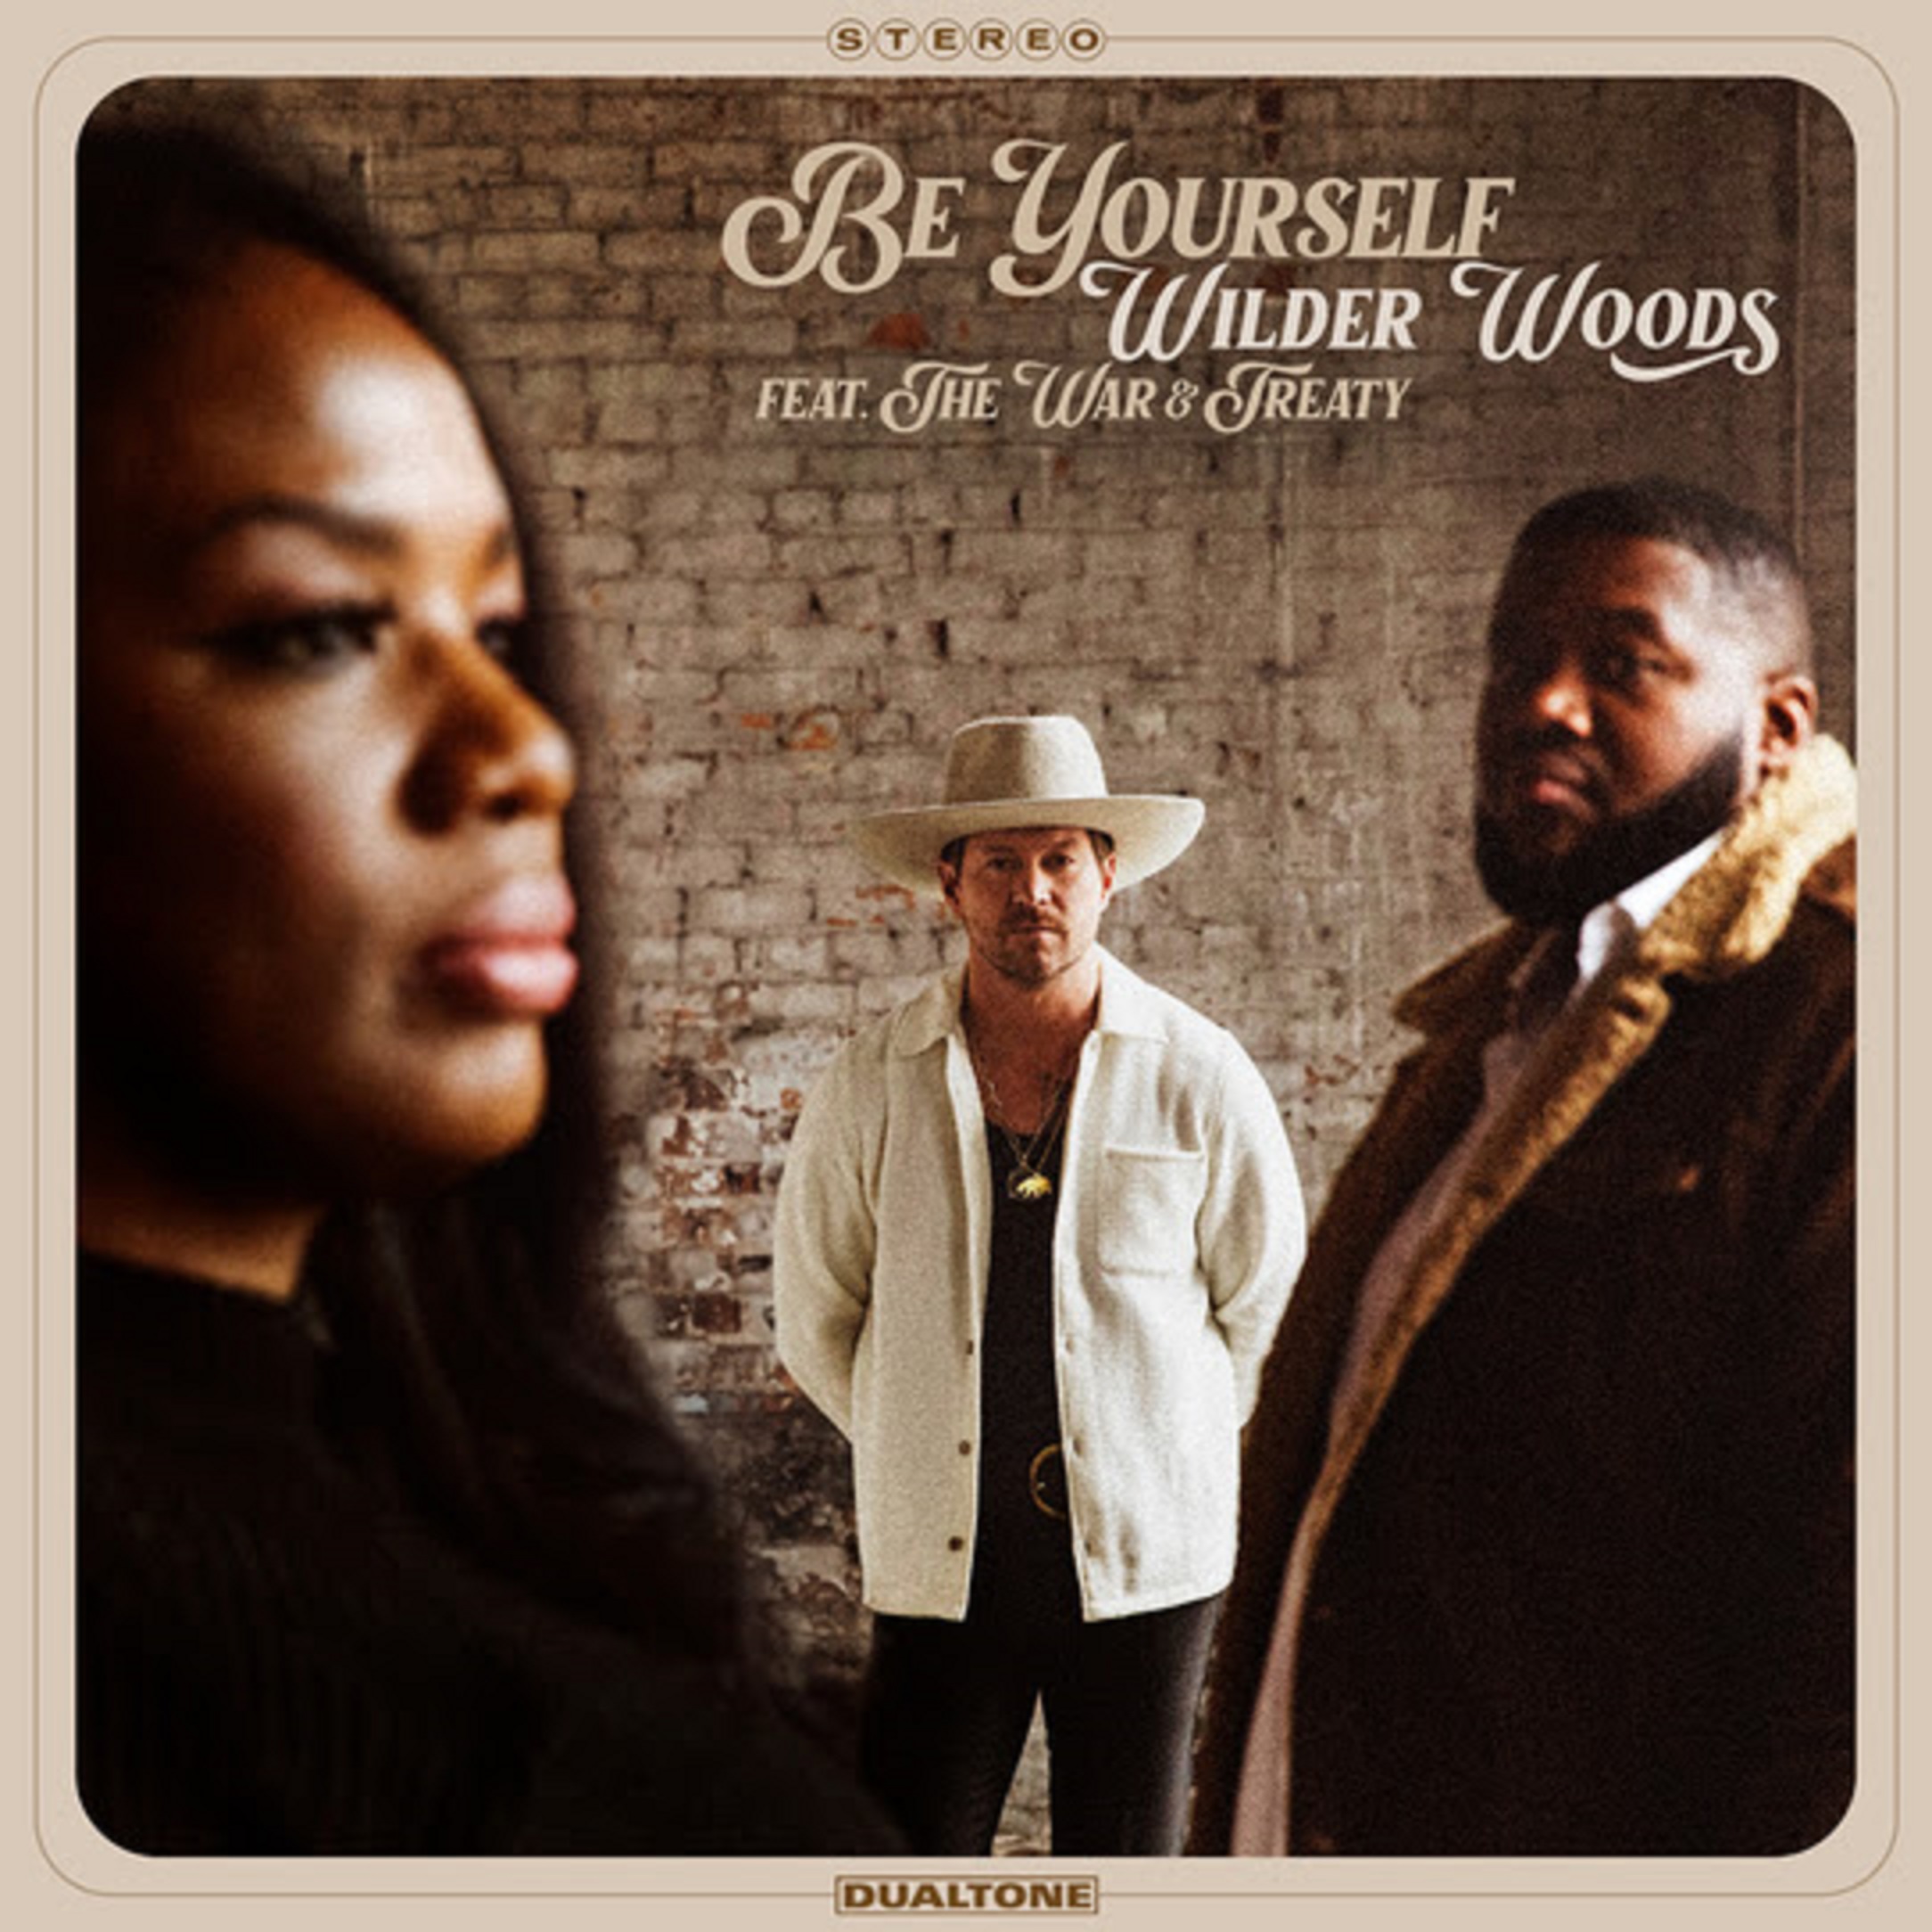 WILDER WOODS Teams Up With Grammy-Nominated Duo THE WAR & TREATY On New Single "Be Yourself"